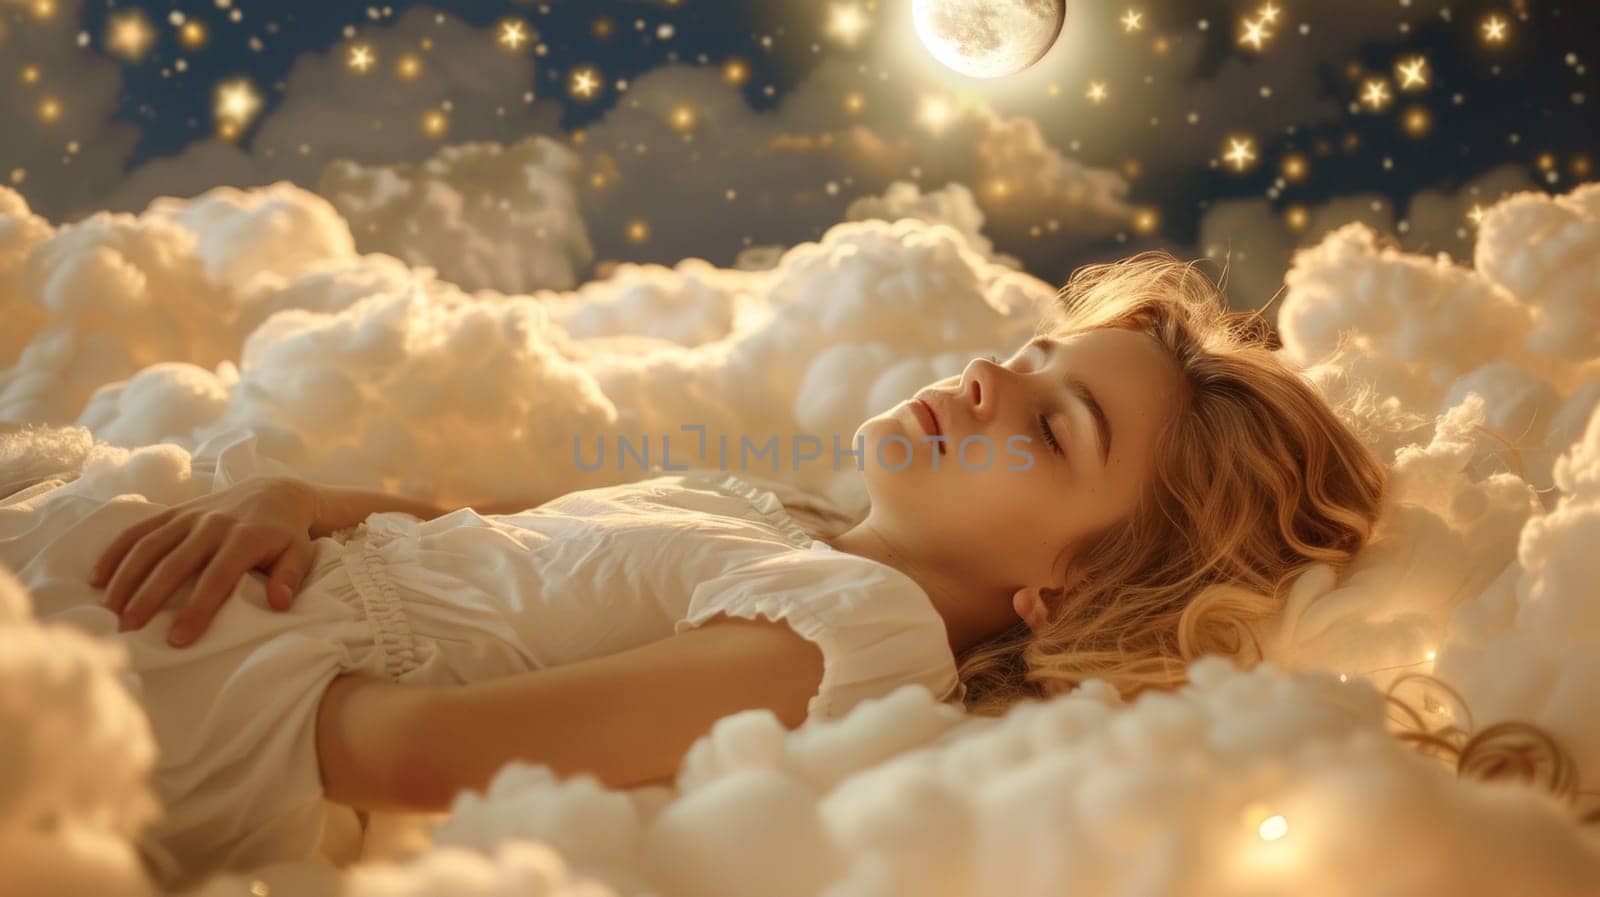 A little girl sleeping on clouds with a full moon in the sky, AI by starush